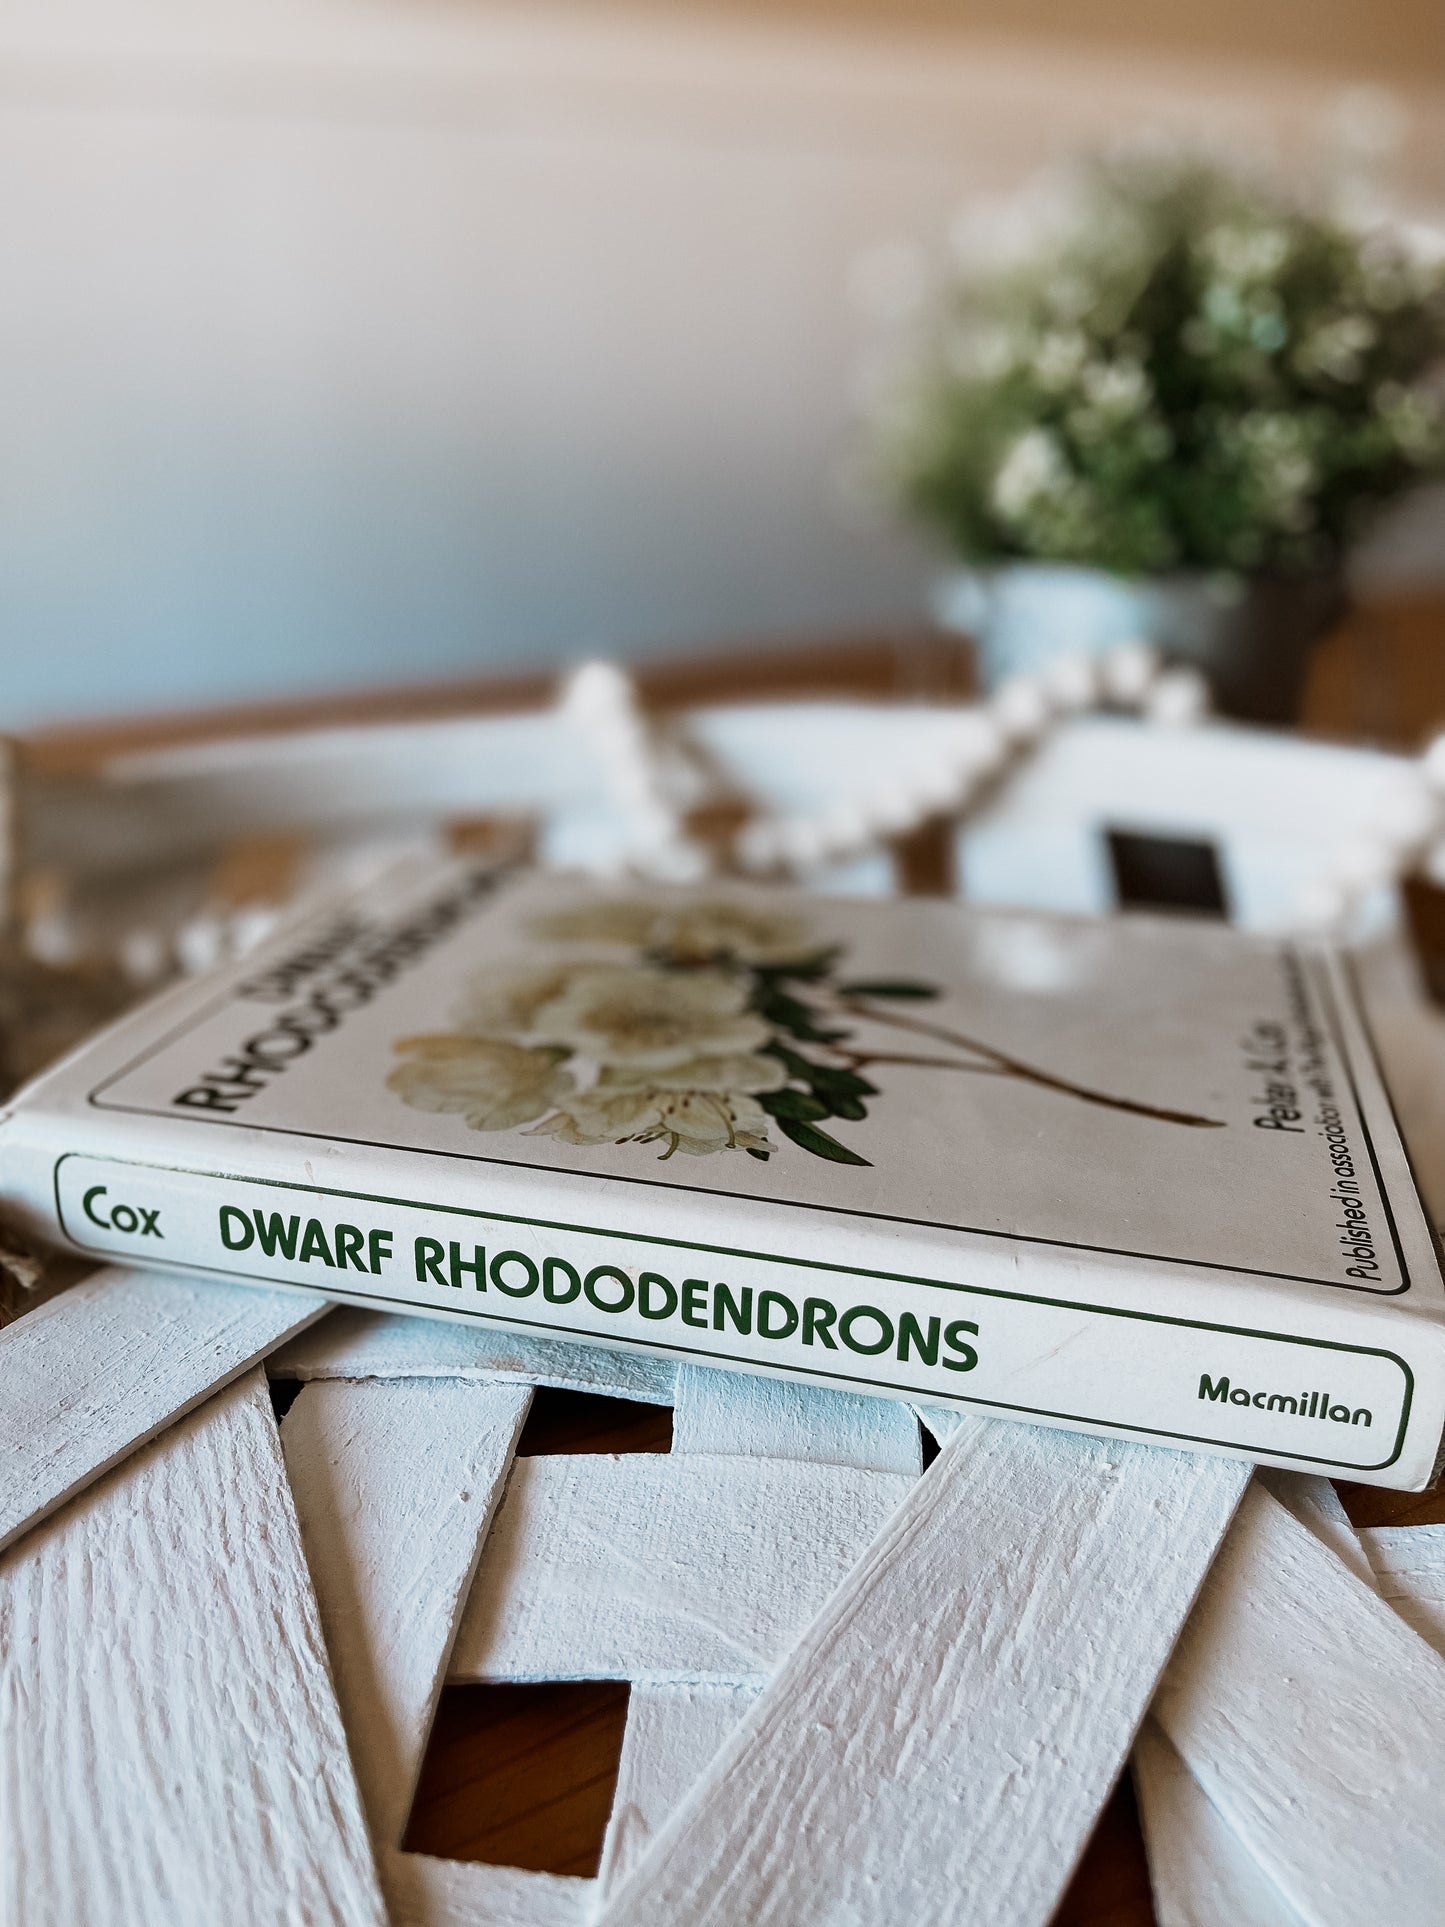 Dwarf Rhododendrons Book